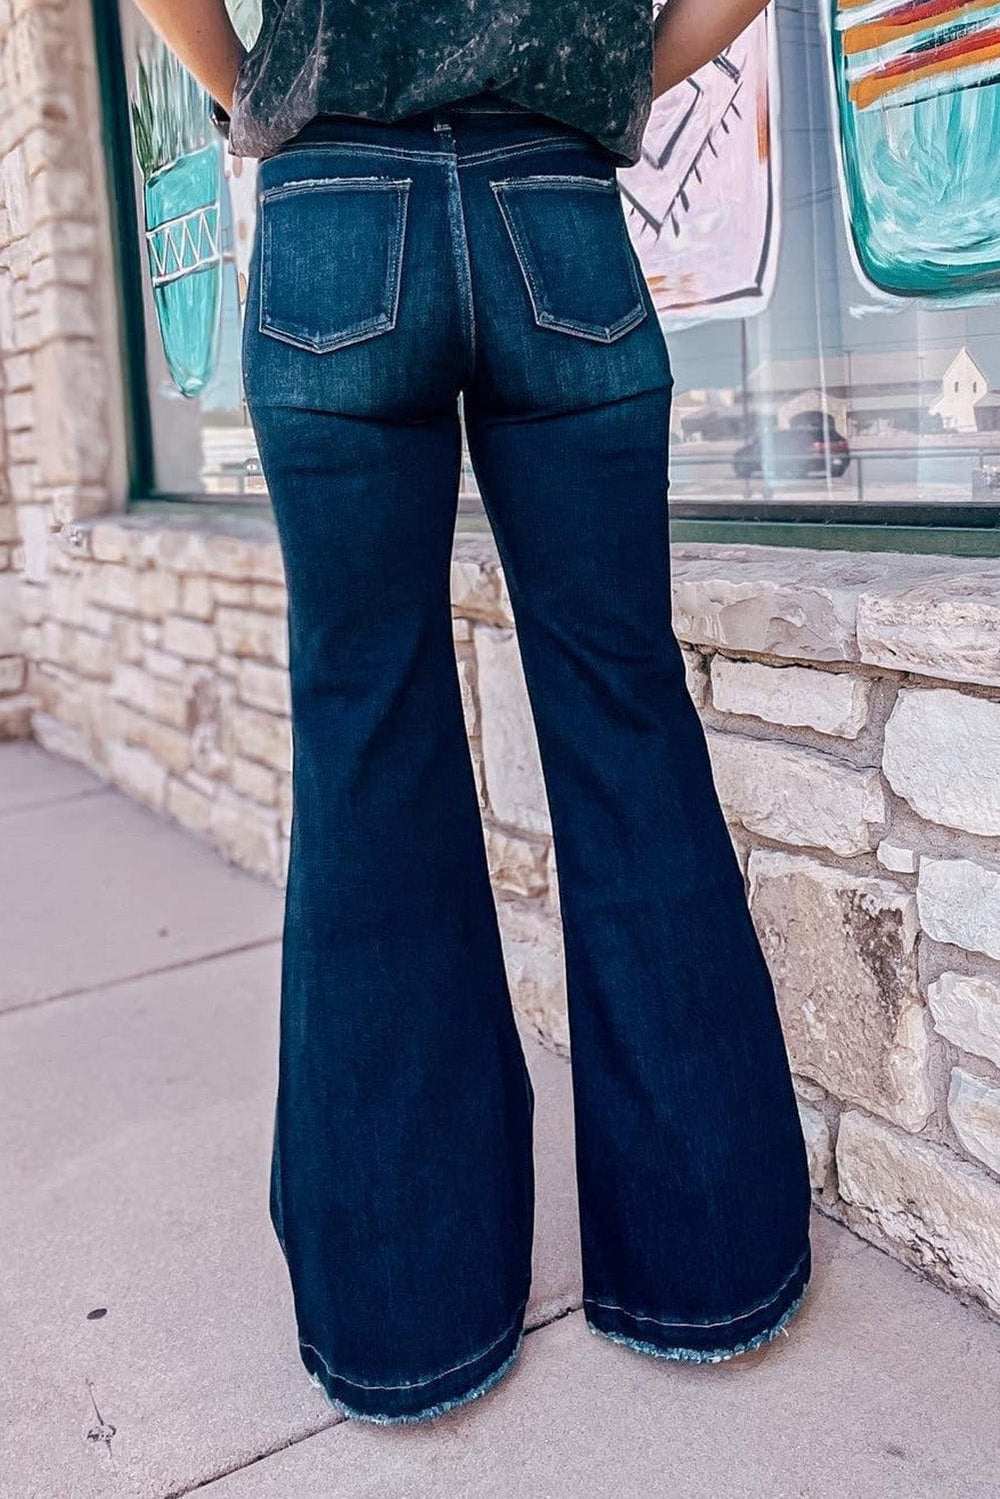 The802Gypsy  Bottoms TRAVELING GYPSY-High Rise Ripped Bell Bottom Jeans